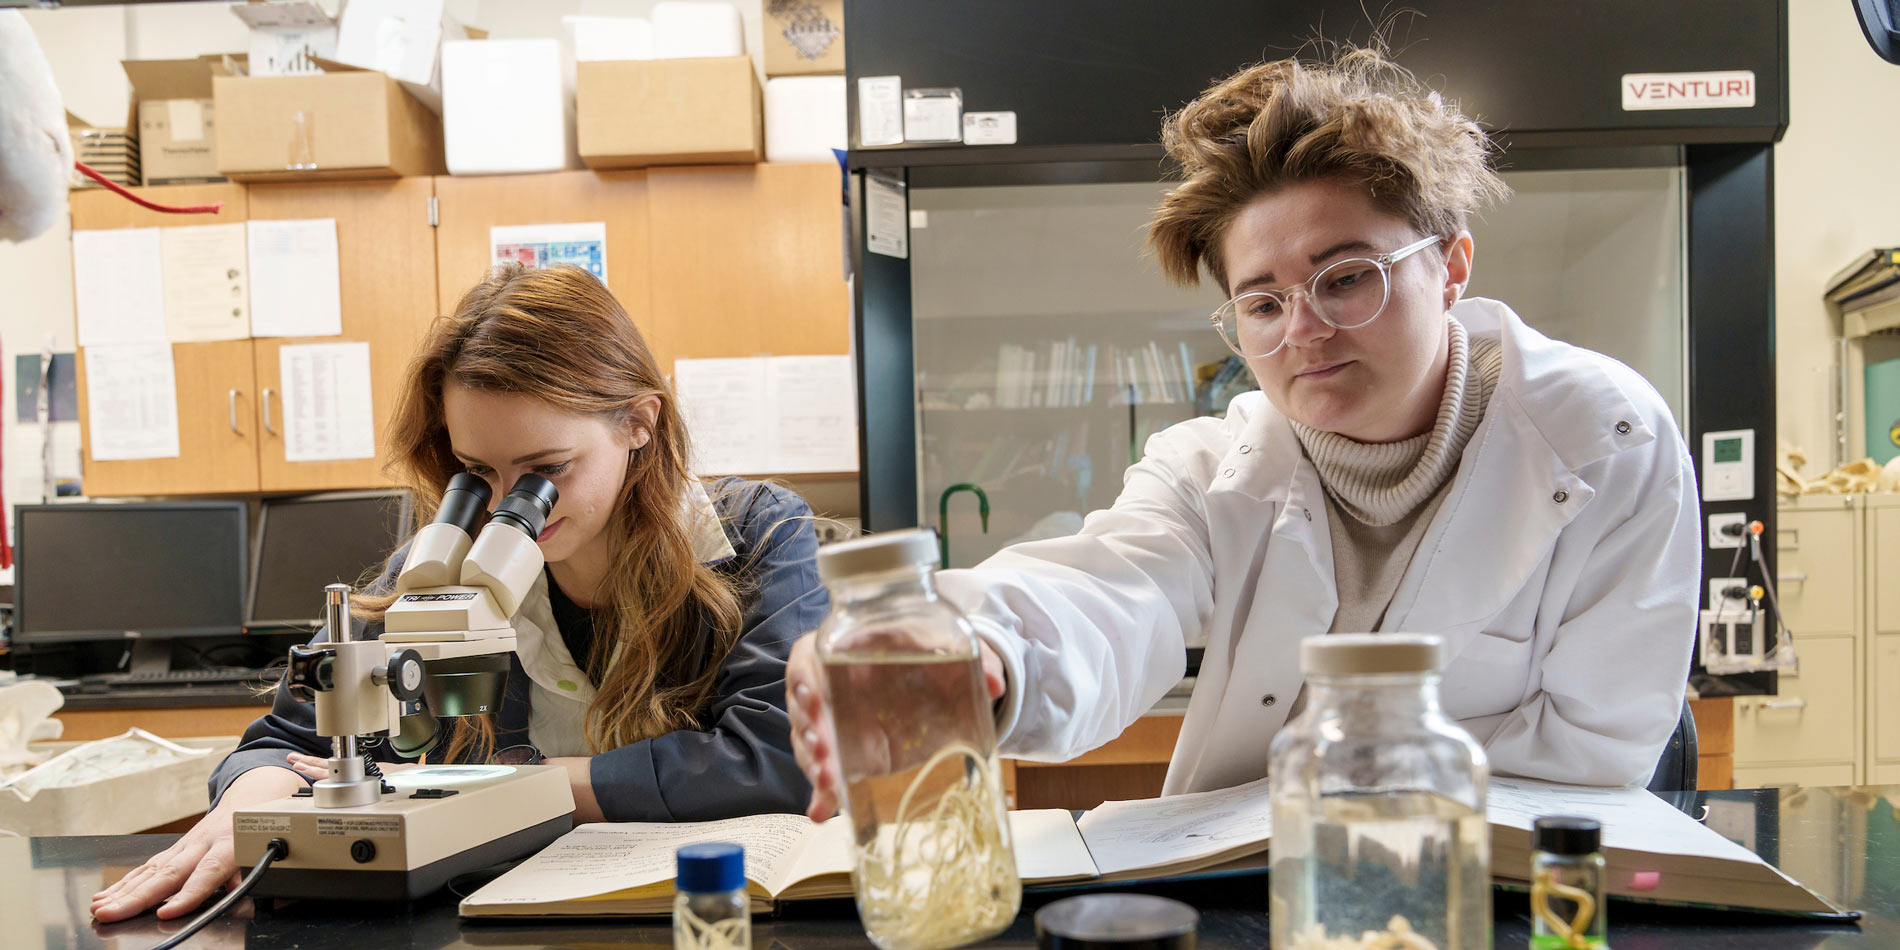 Students in a lab with jars and a microscope